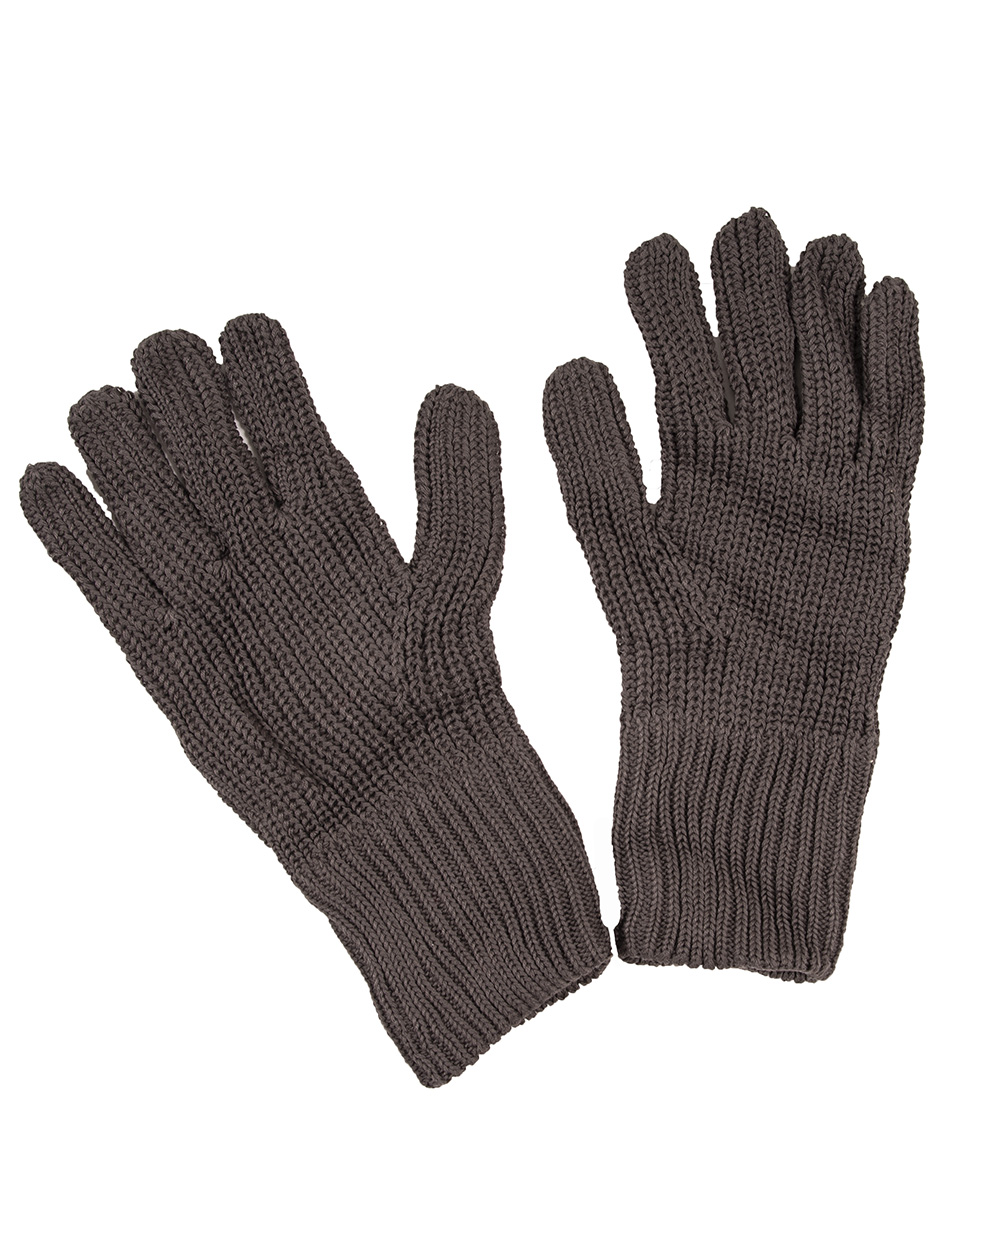 https://blog.atthefront.com/g_images/pers/knit-gloves-main.jpg